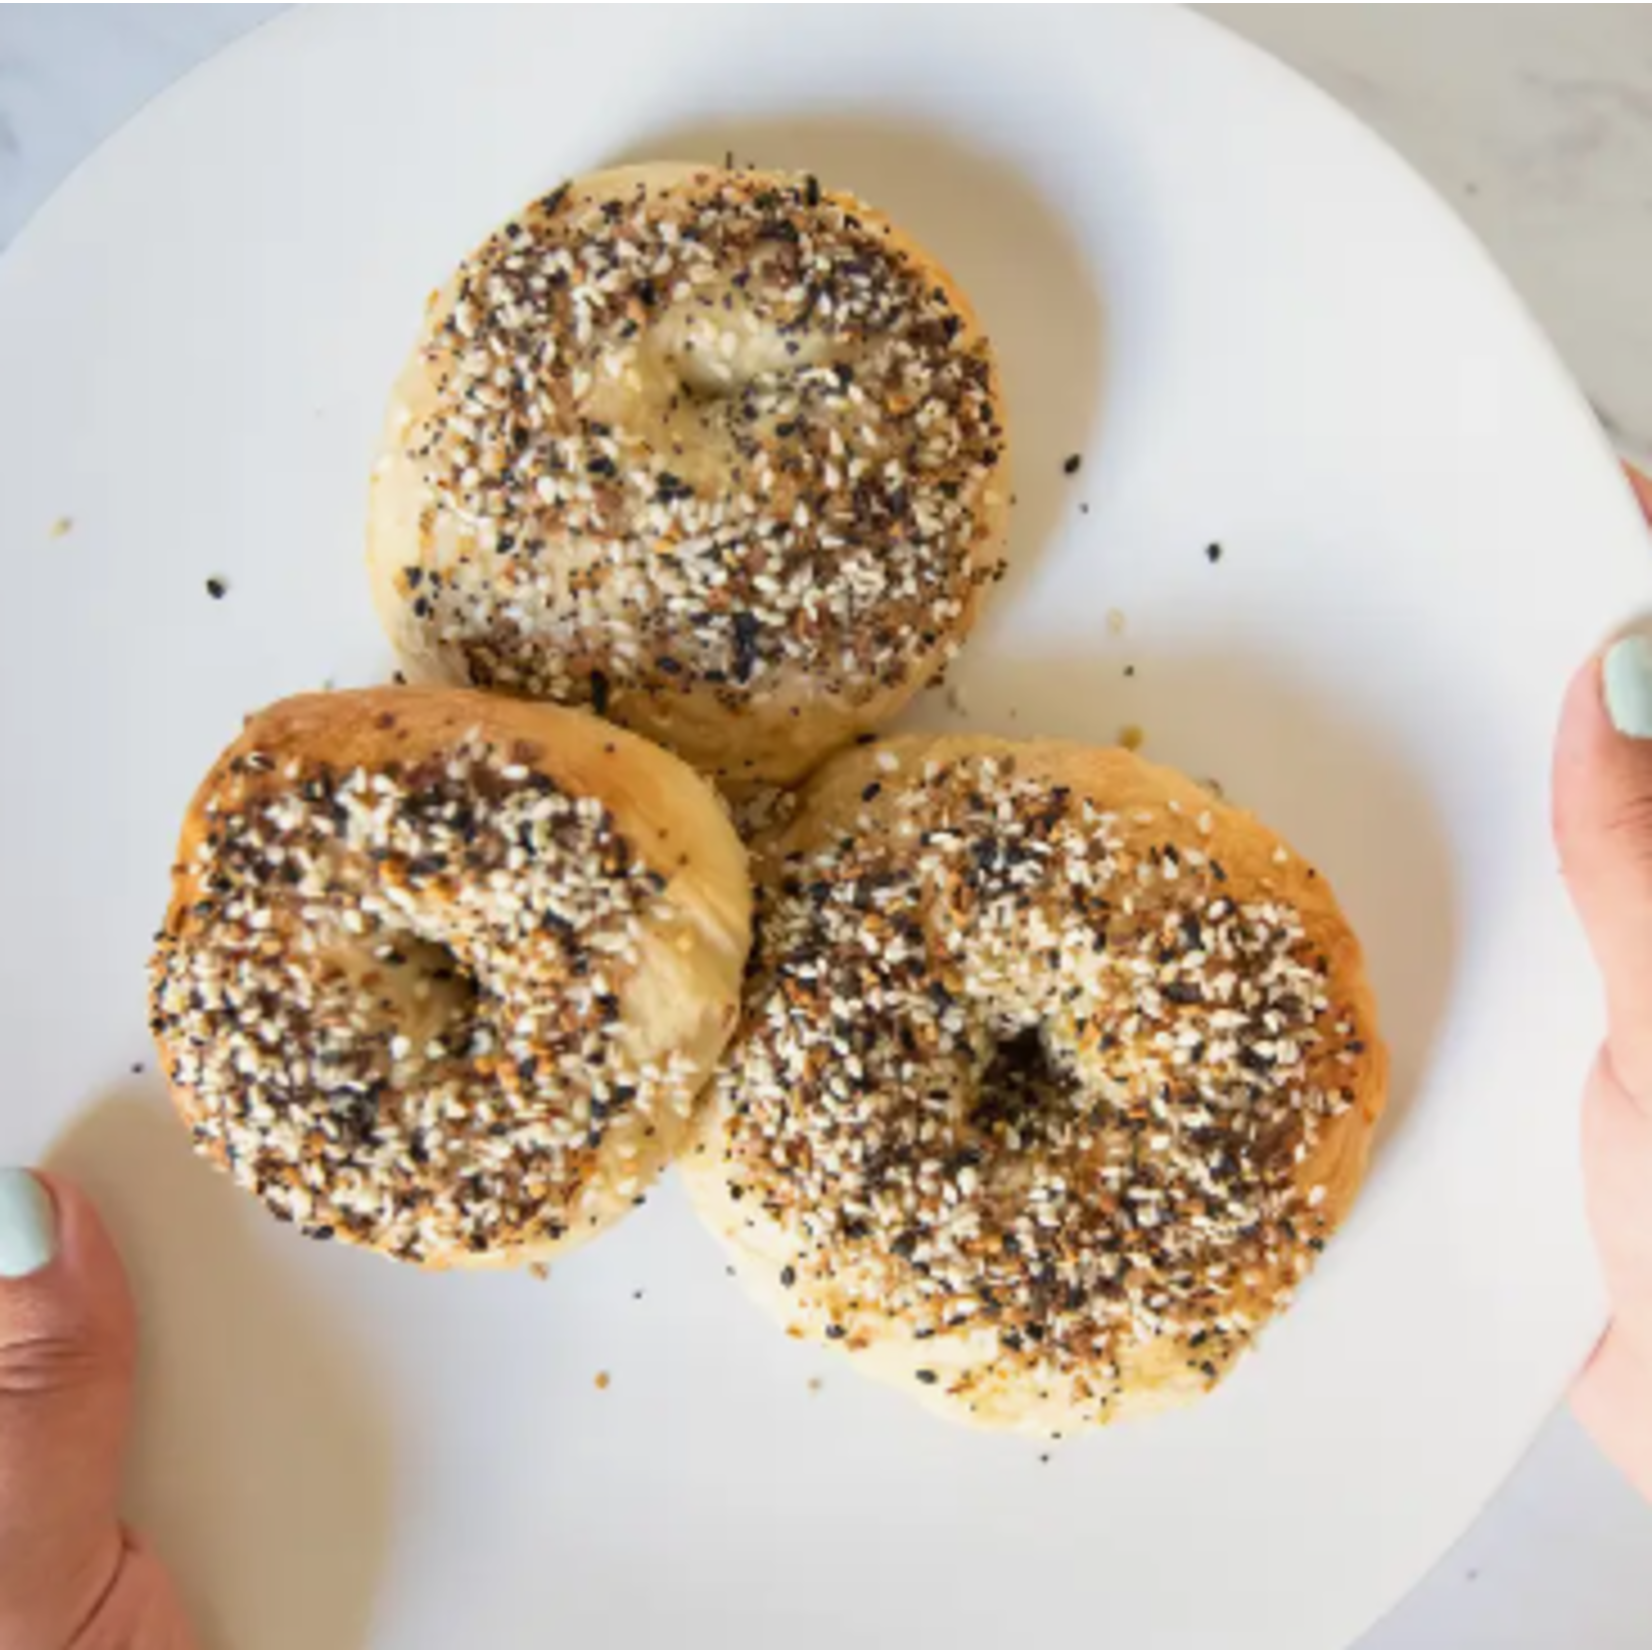 Everything Bagel and Cream Cheese Making Kit